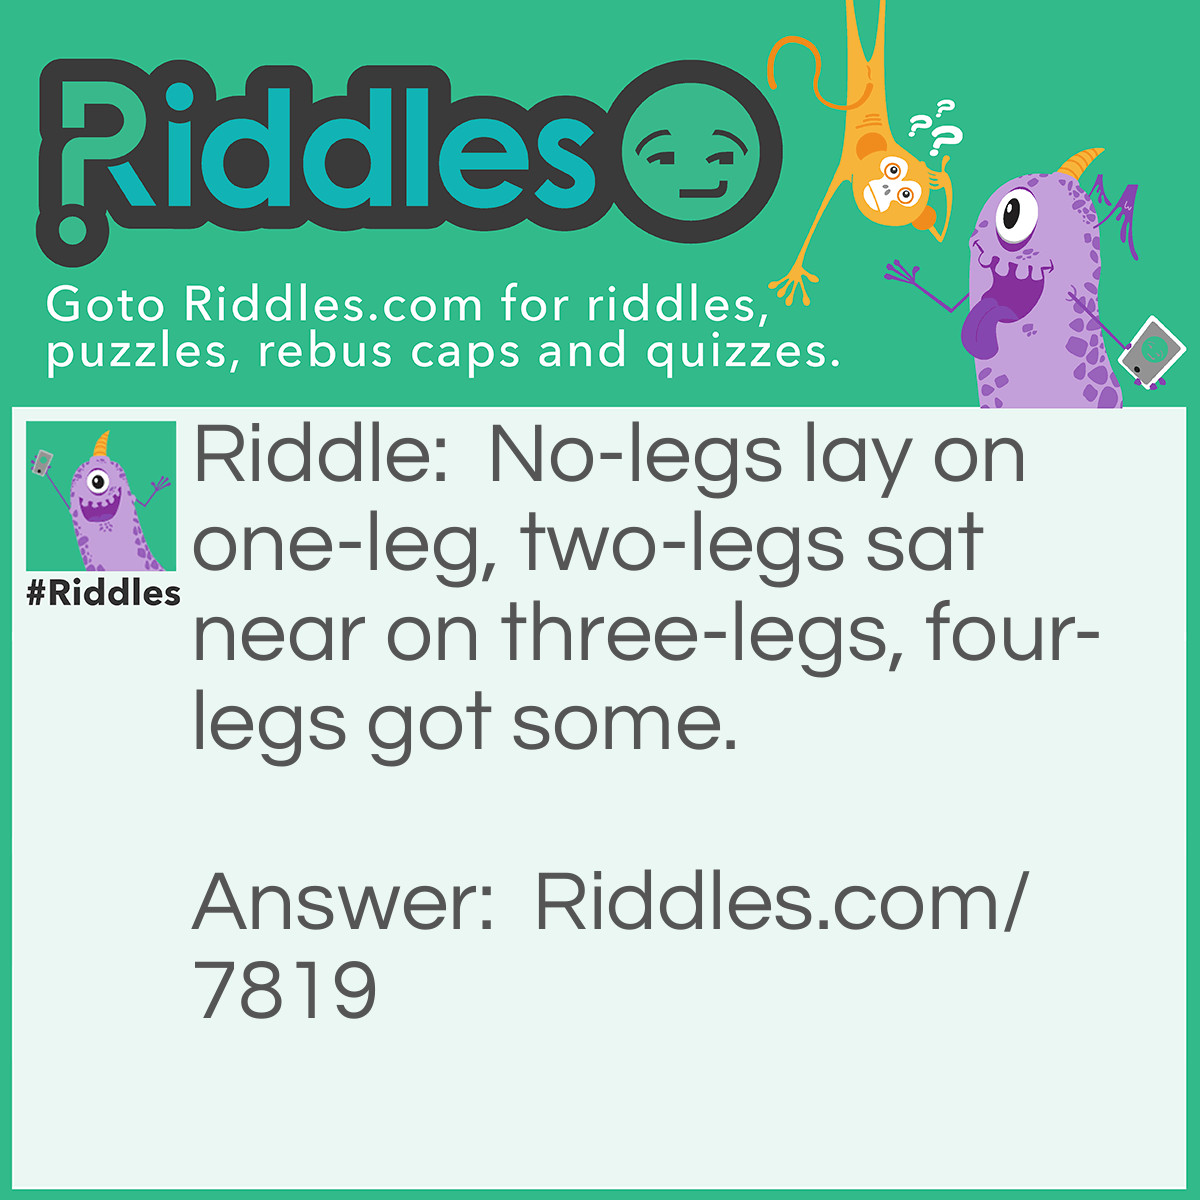 Riddle: No-legs lay on one-leg, two-legs sat near on three-legs, four-legs got some. Answer: Fish on a table, man on a stool, cat gets the scraps